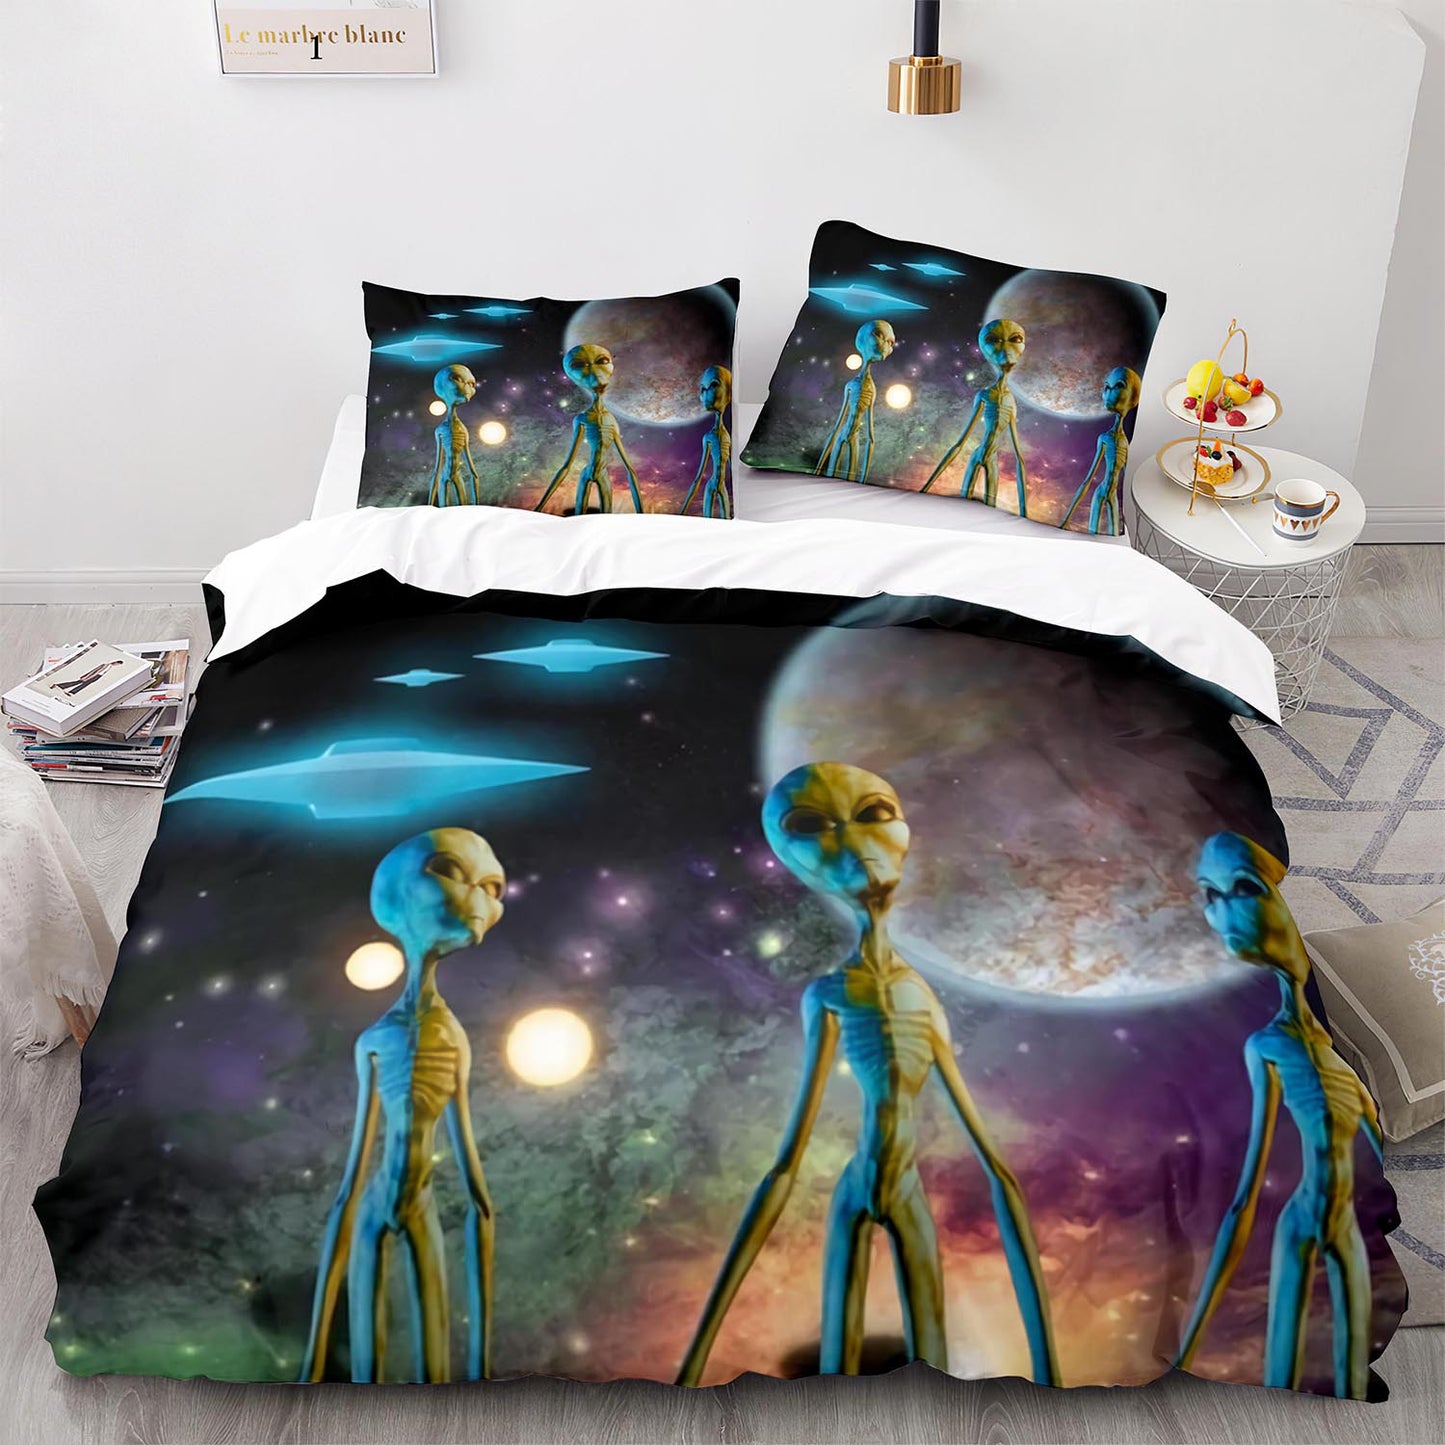 Cutom Duvet Cover Set Pattern Chic Comforter Cover King Size for Teens Adults Bedding Set with Pillowcases  WXR1014